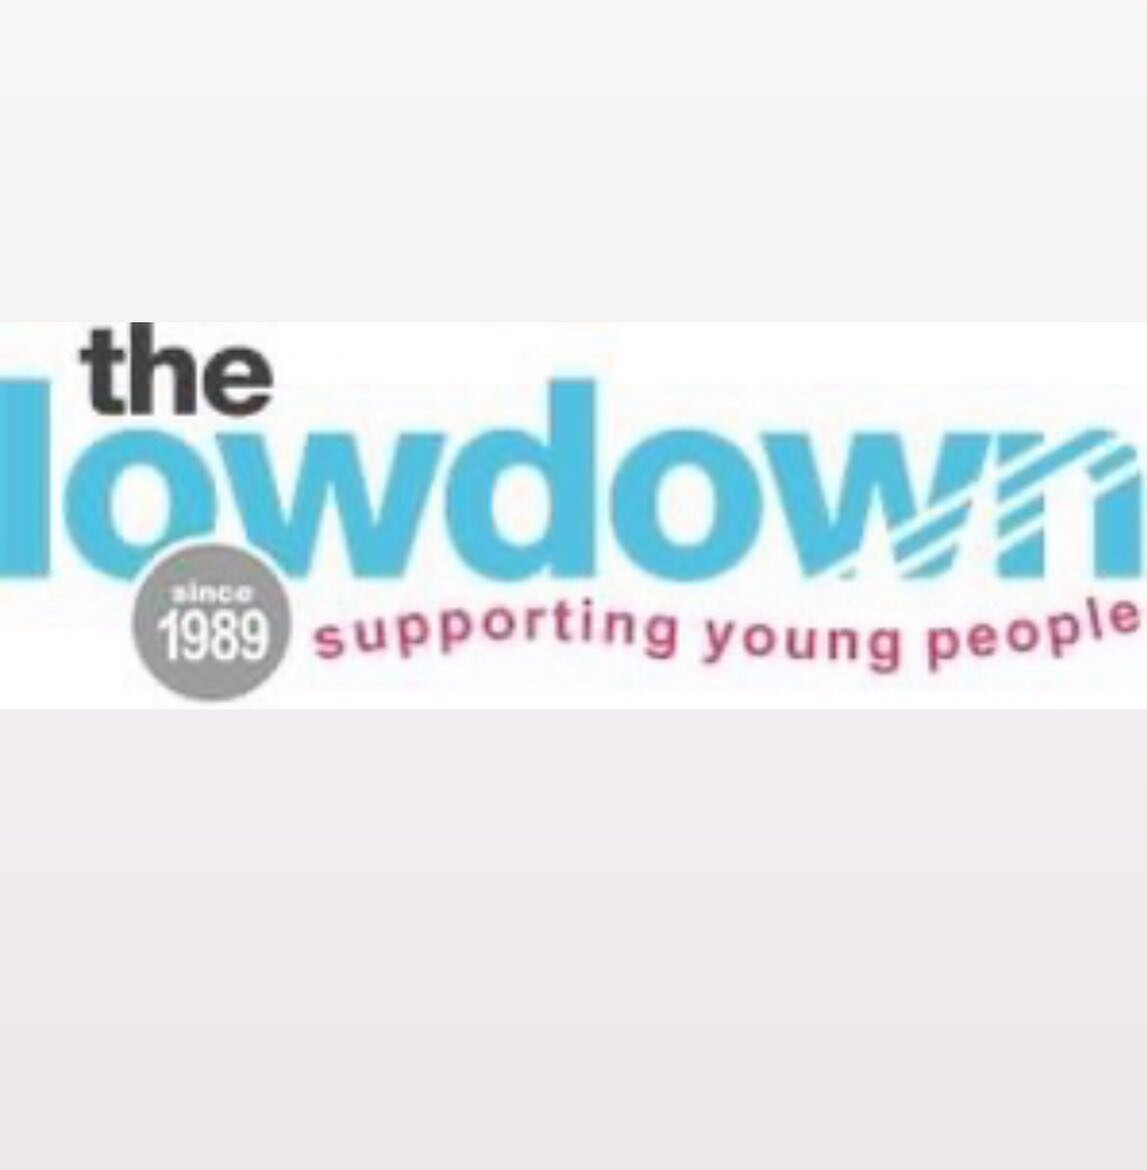 The final charity we supported in 2022 was Lowdown. Lowdown are a Mental Health charity, providing free and confidential support services for 11- 25 year olds in Northamptonshire.

With the funding provided Lowdown were able to complete their aim of 